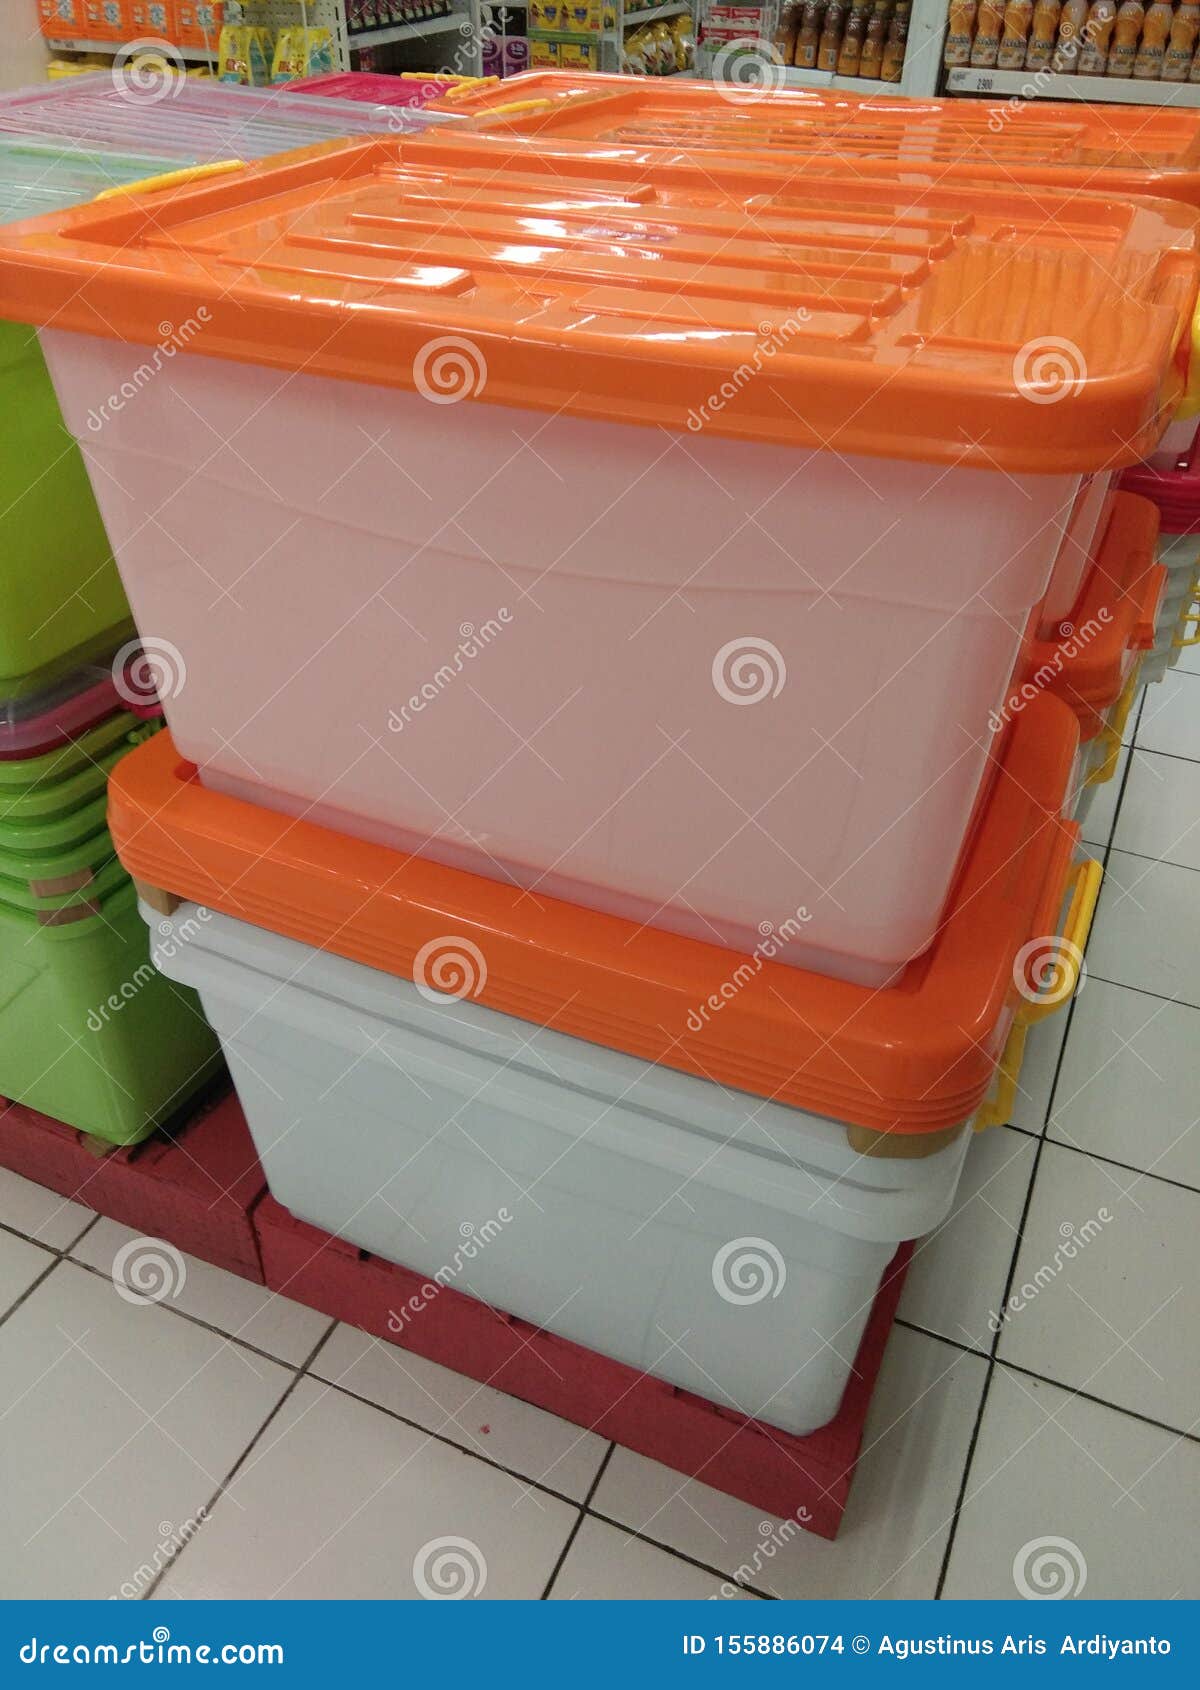 A Large Tupperware Box for Storing Various Items Stock Photo - Image of  food, lunch: 155886074